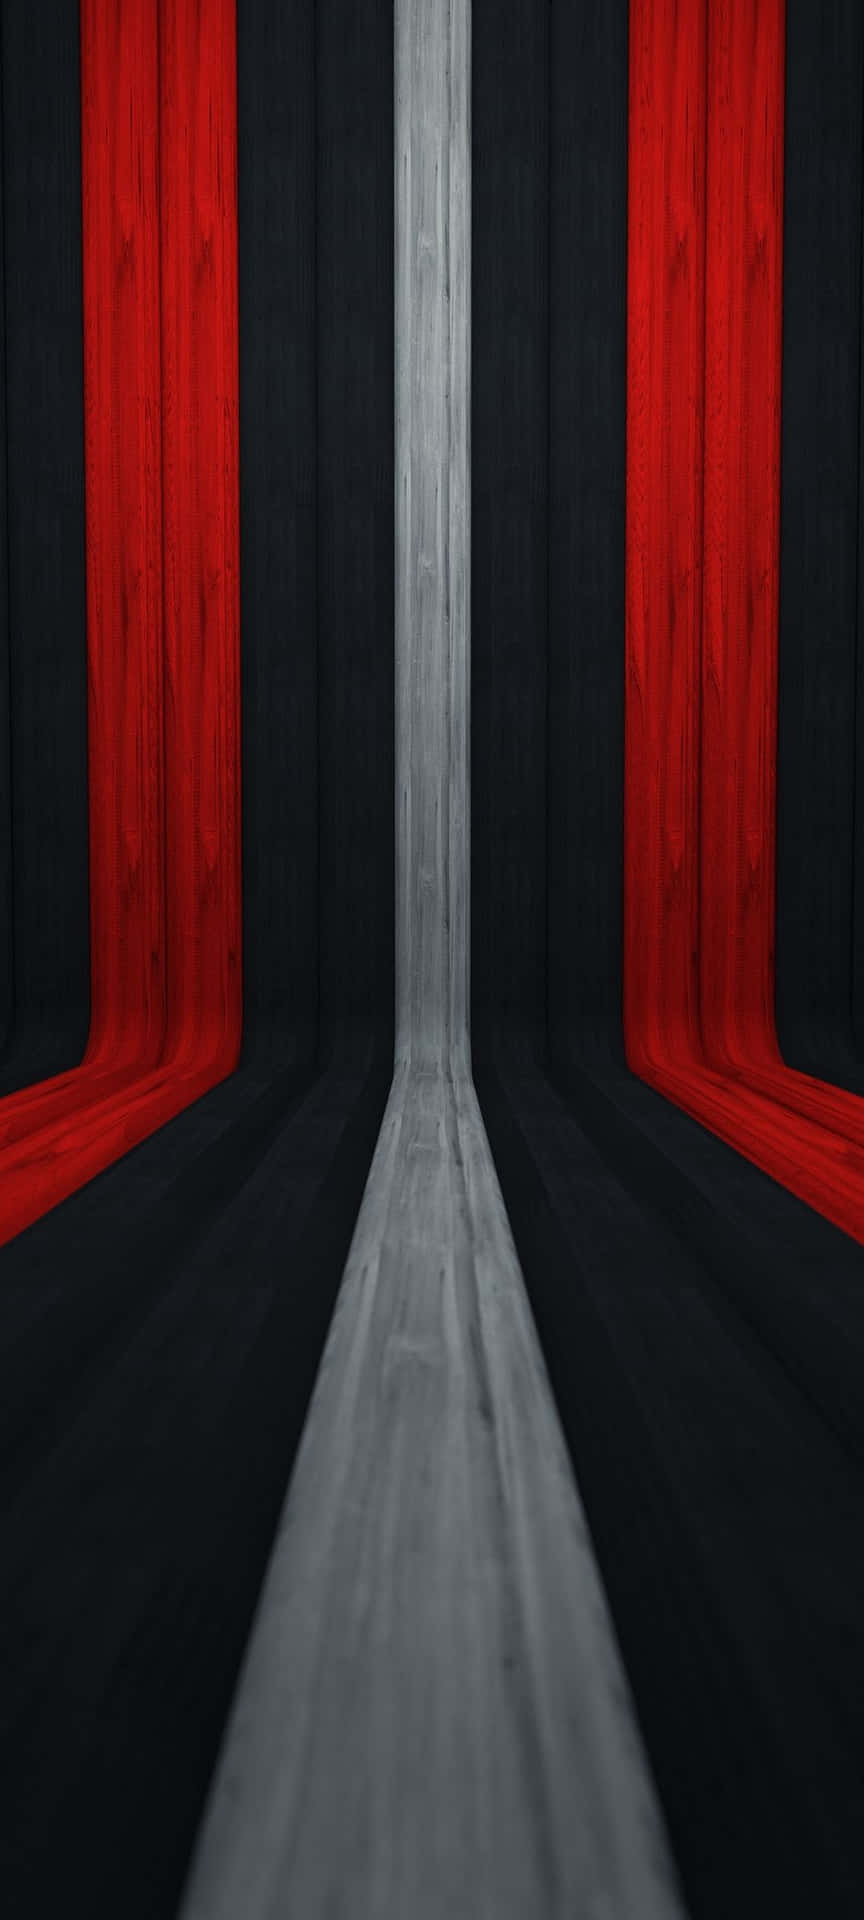 An eye-catching red, white and black abstract design. Wallpaper